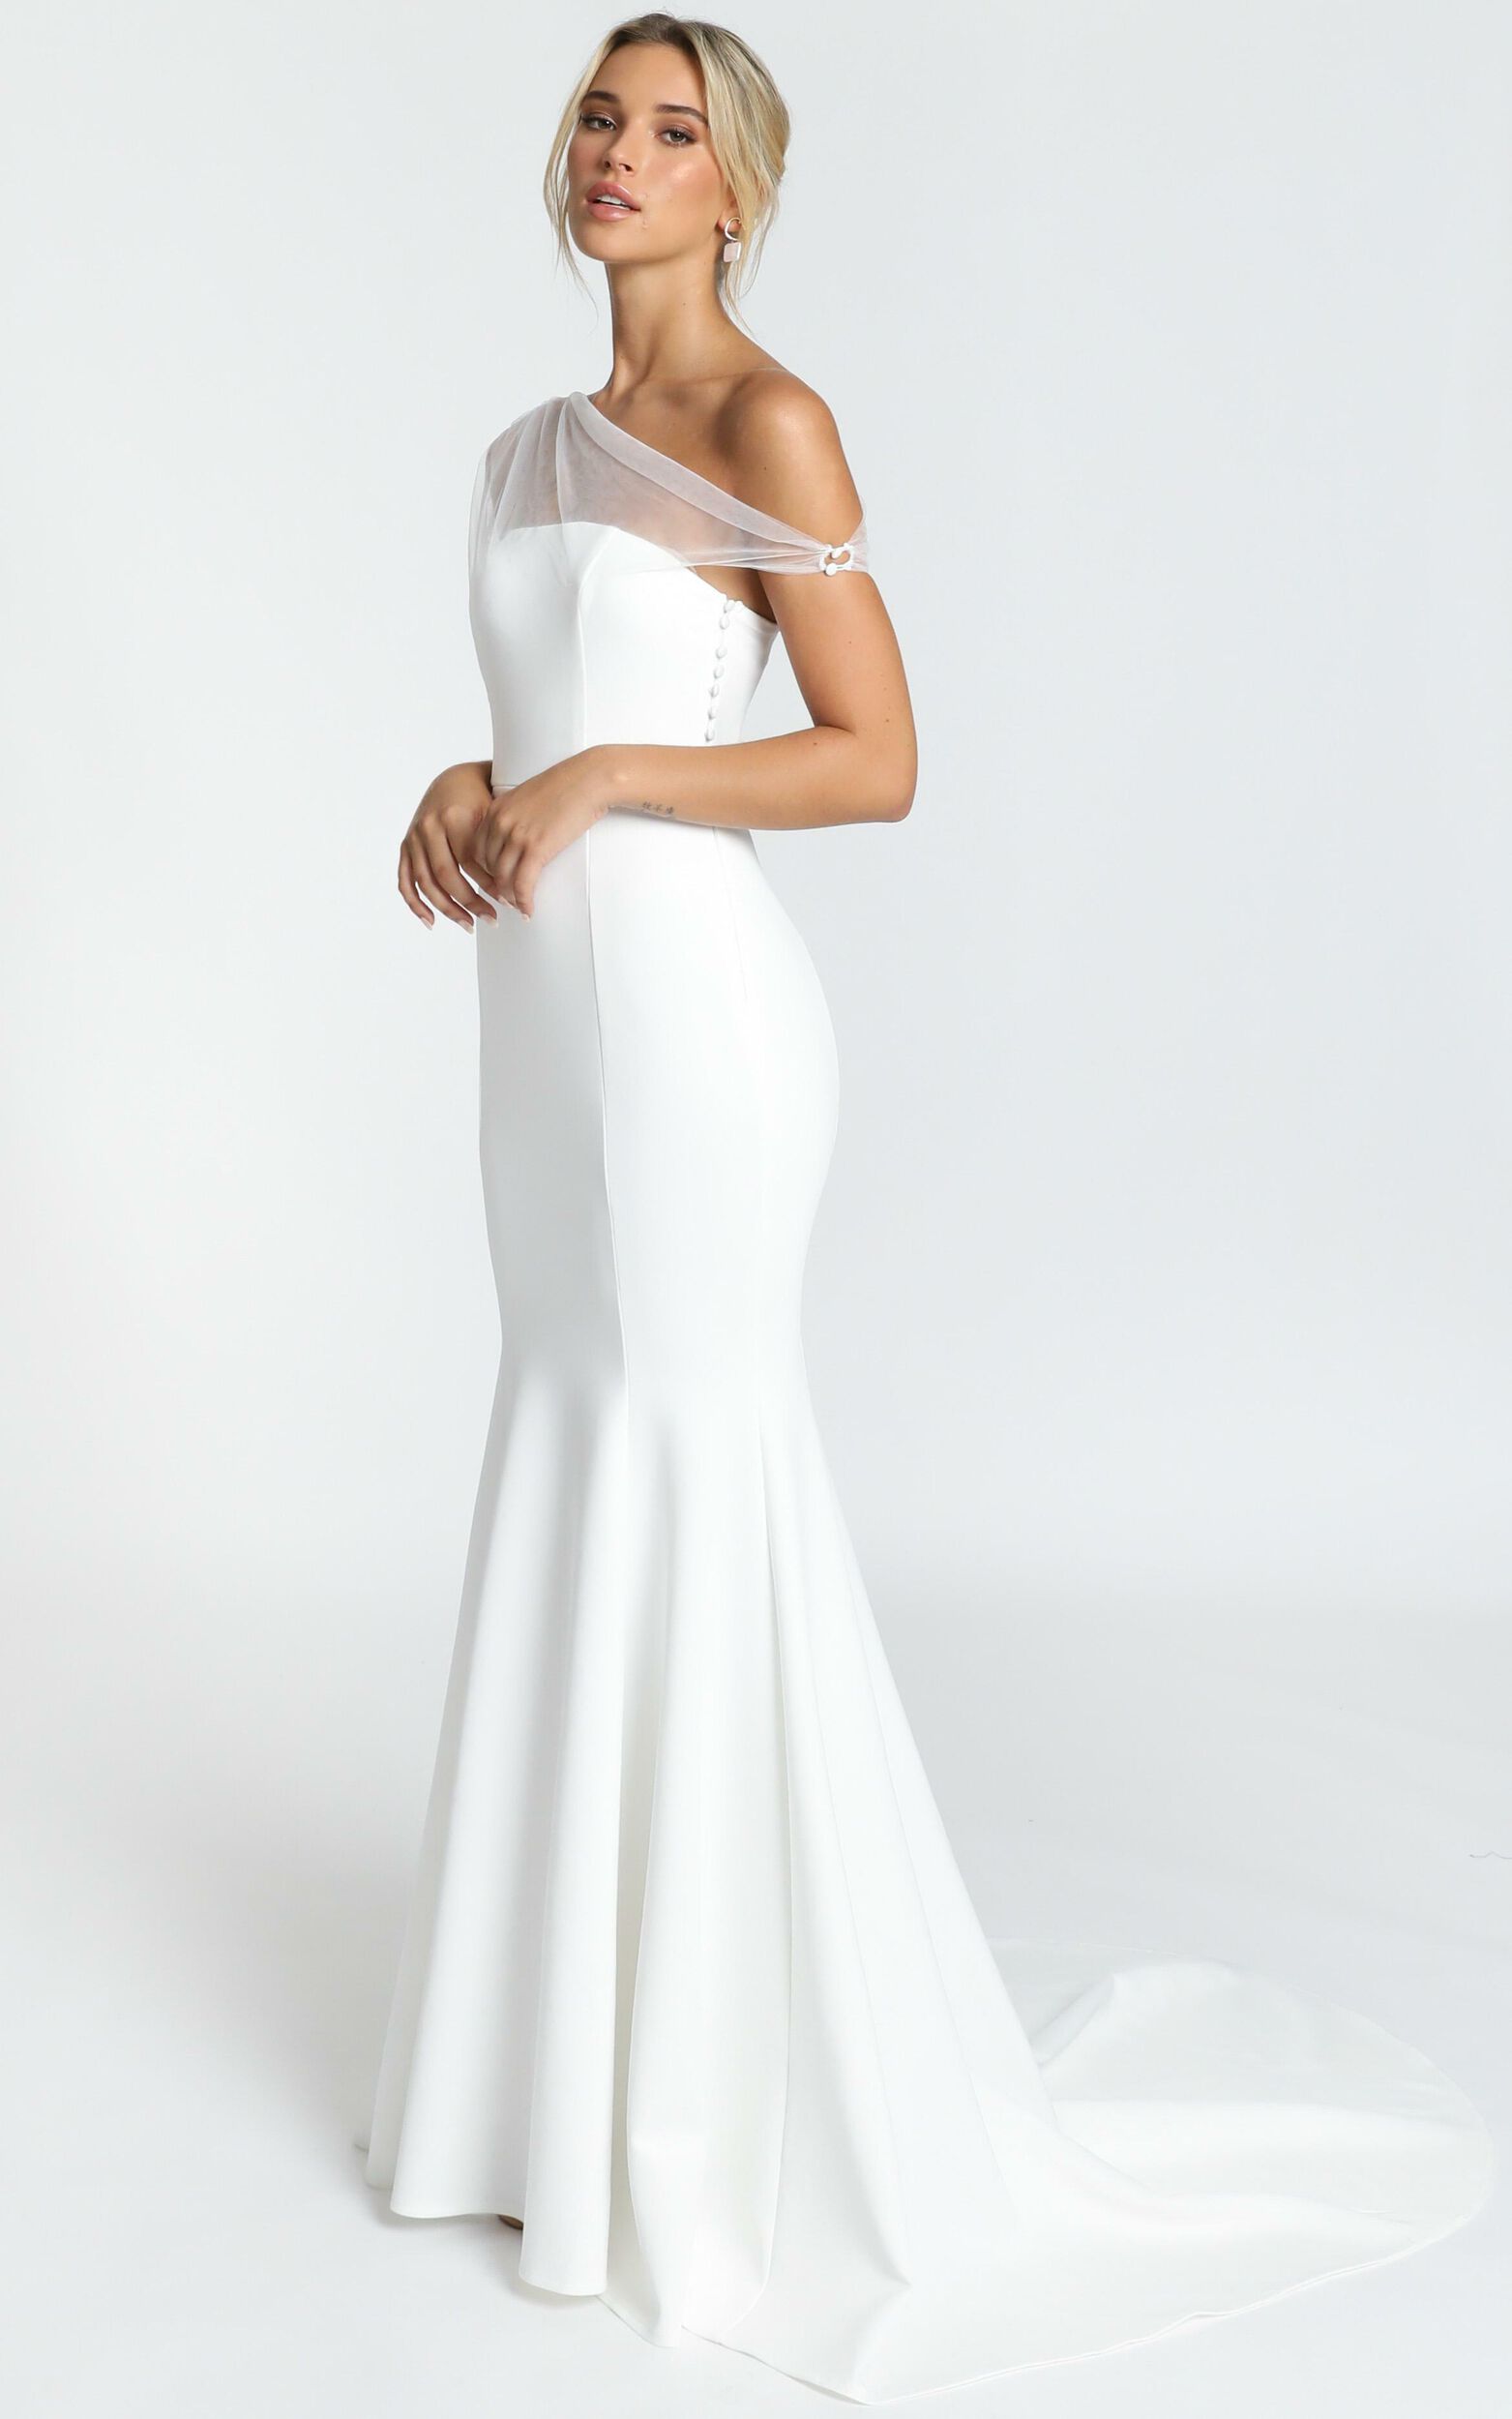 Put A Ring On It Gown - Asymmetric Mesh Shoulder Mermaid Gown in White - 04, WHT1